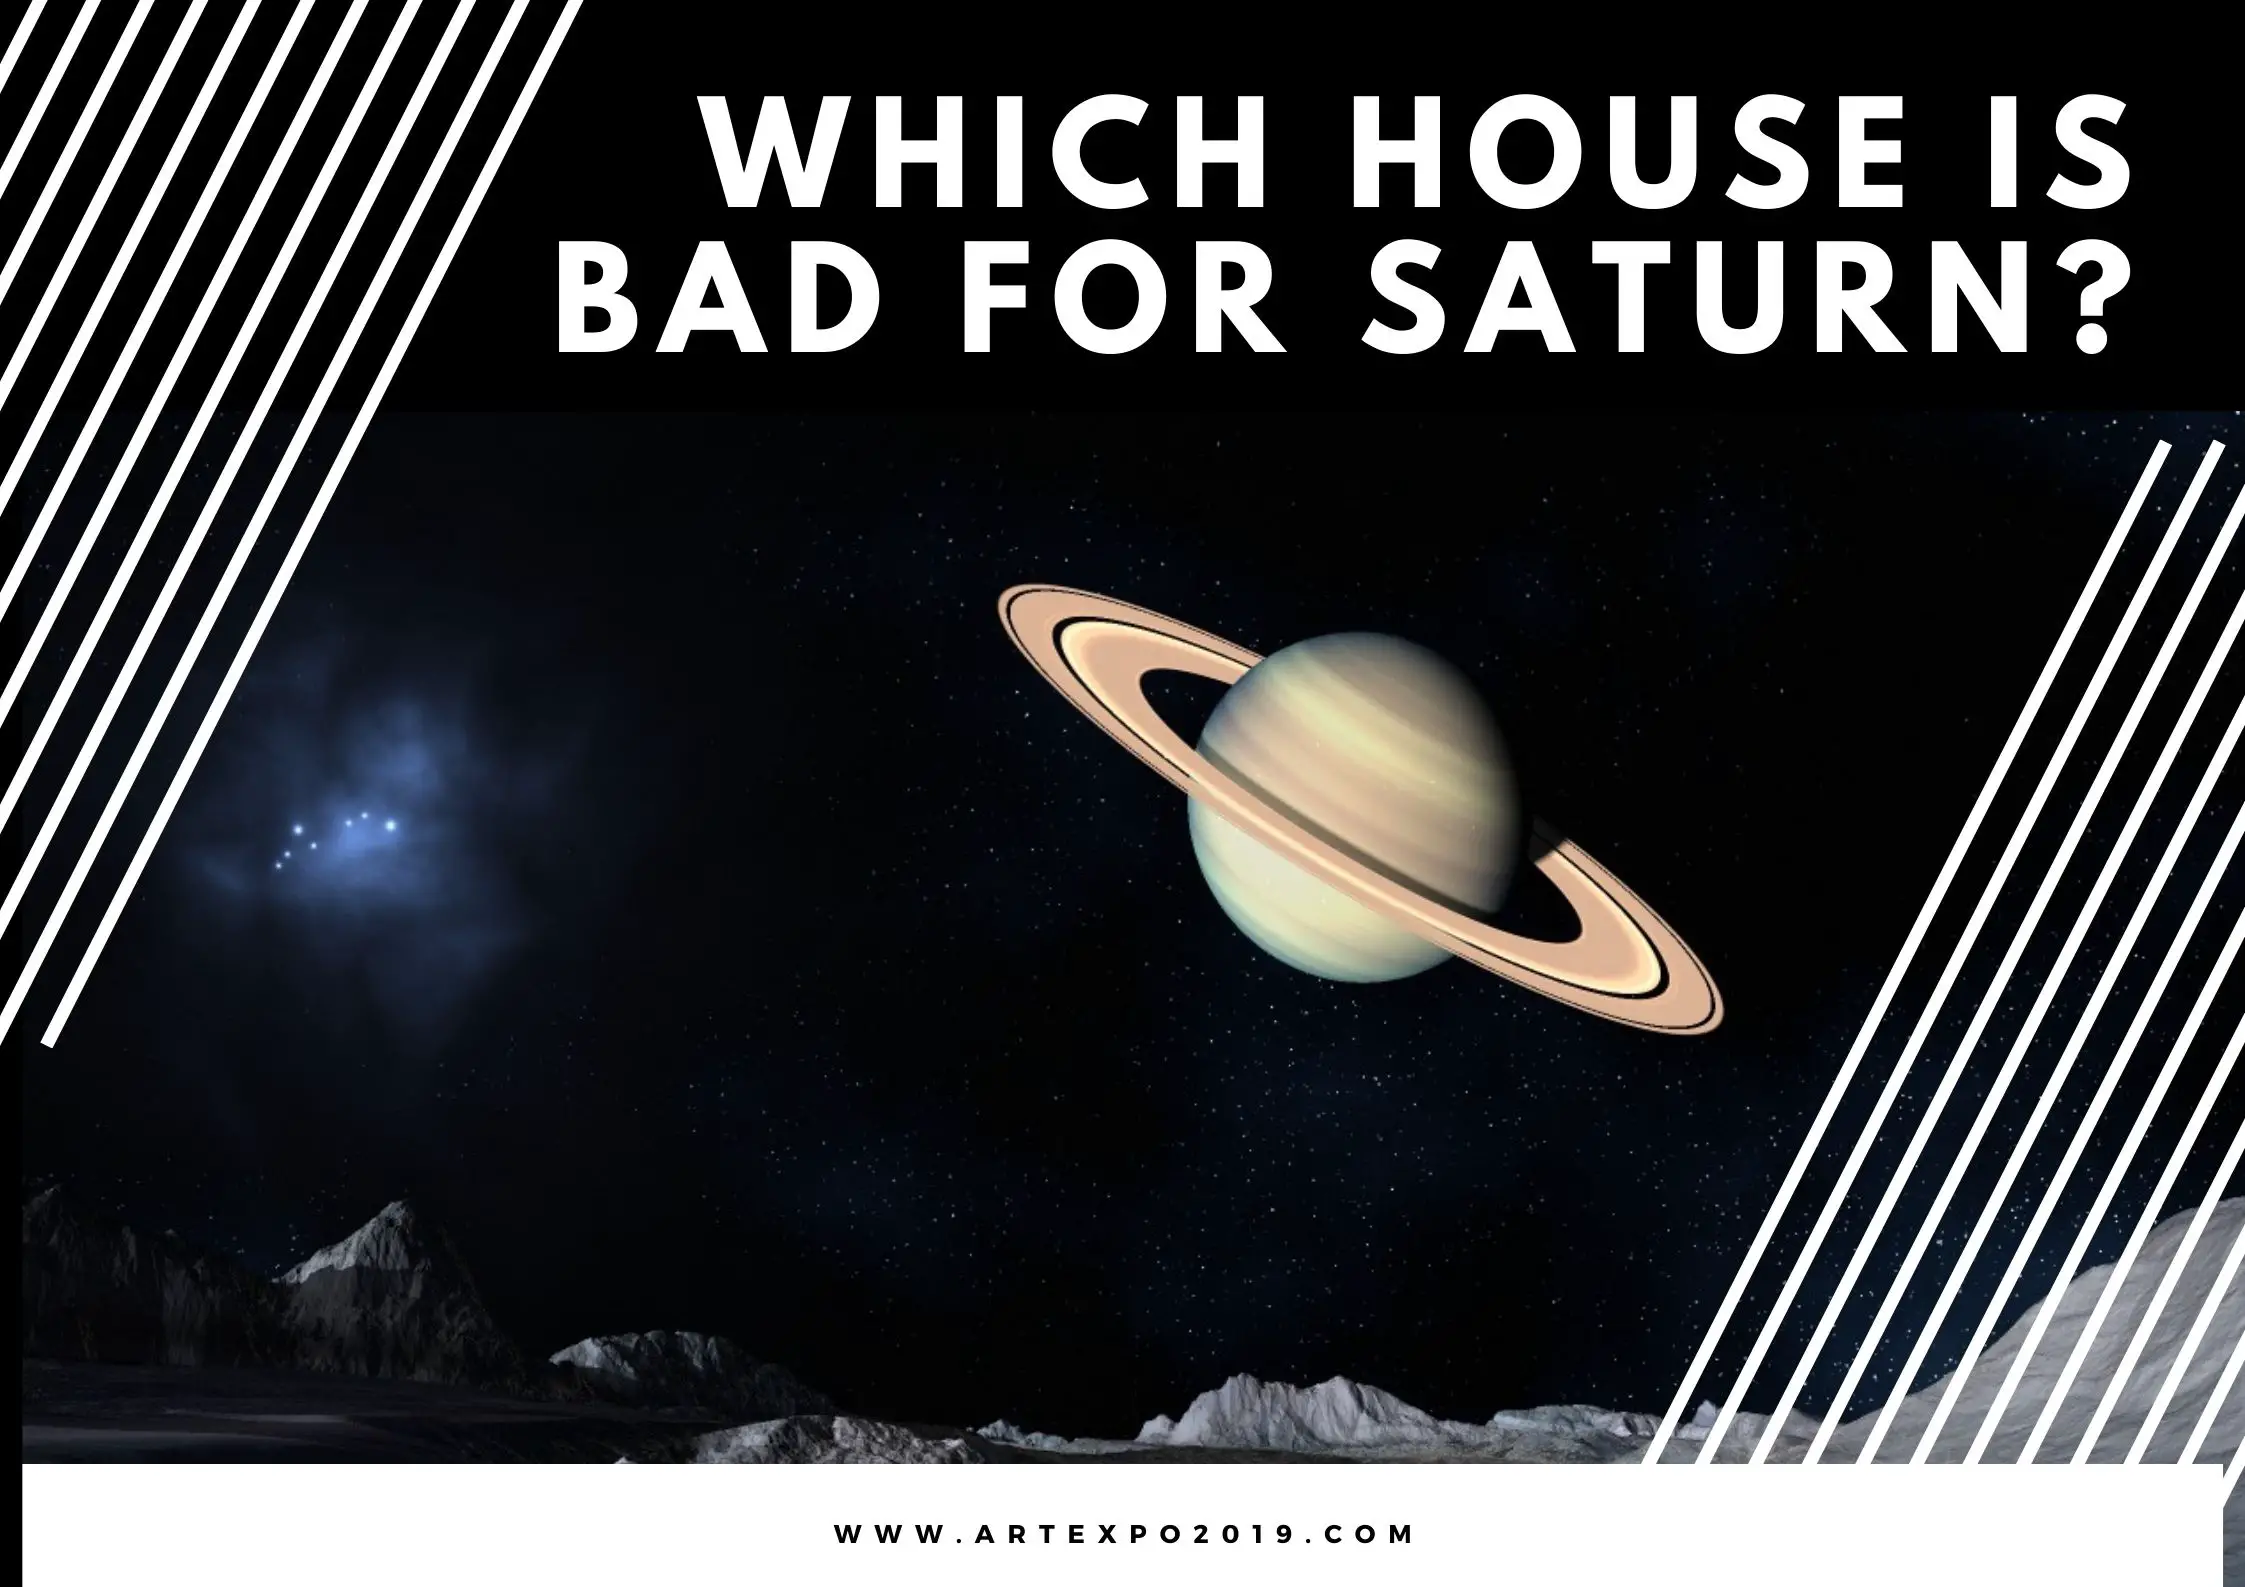 Which house is bad for Saturn?